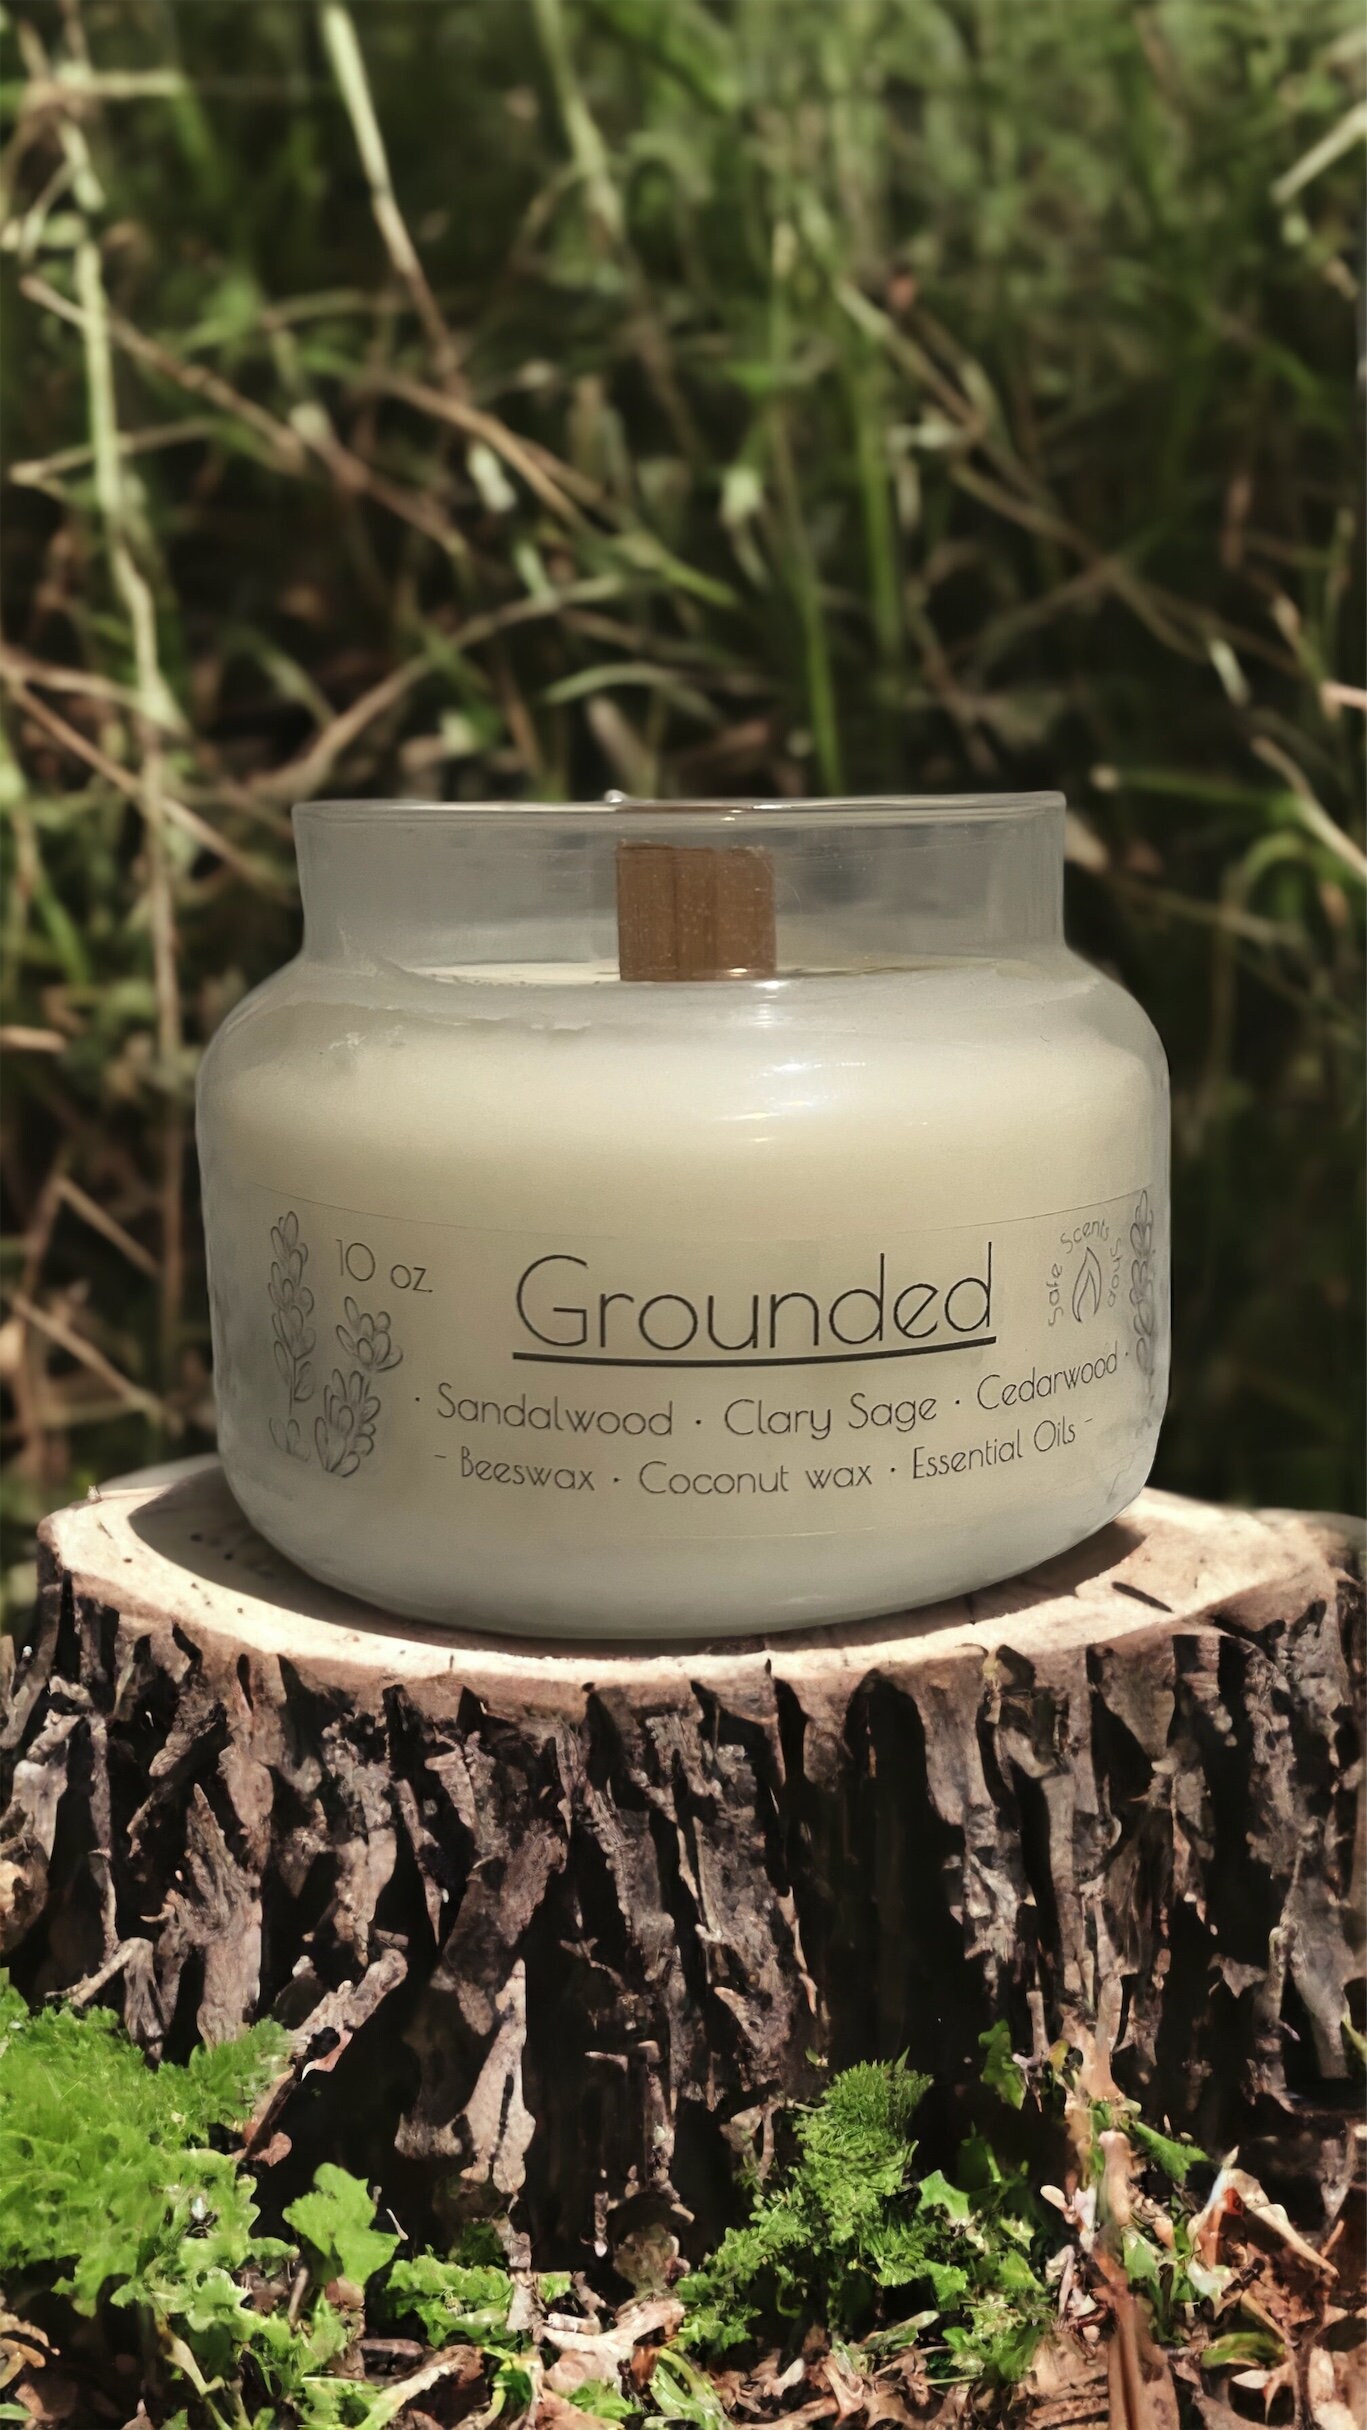 You Are Grounded Frankincense & Patchouli 8oz Candle